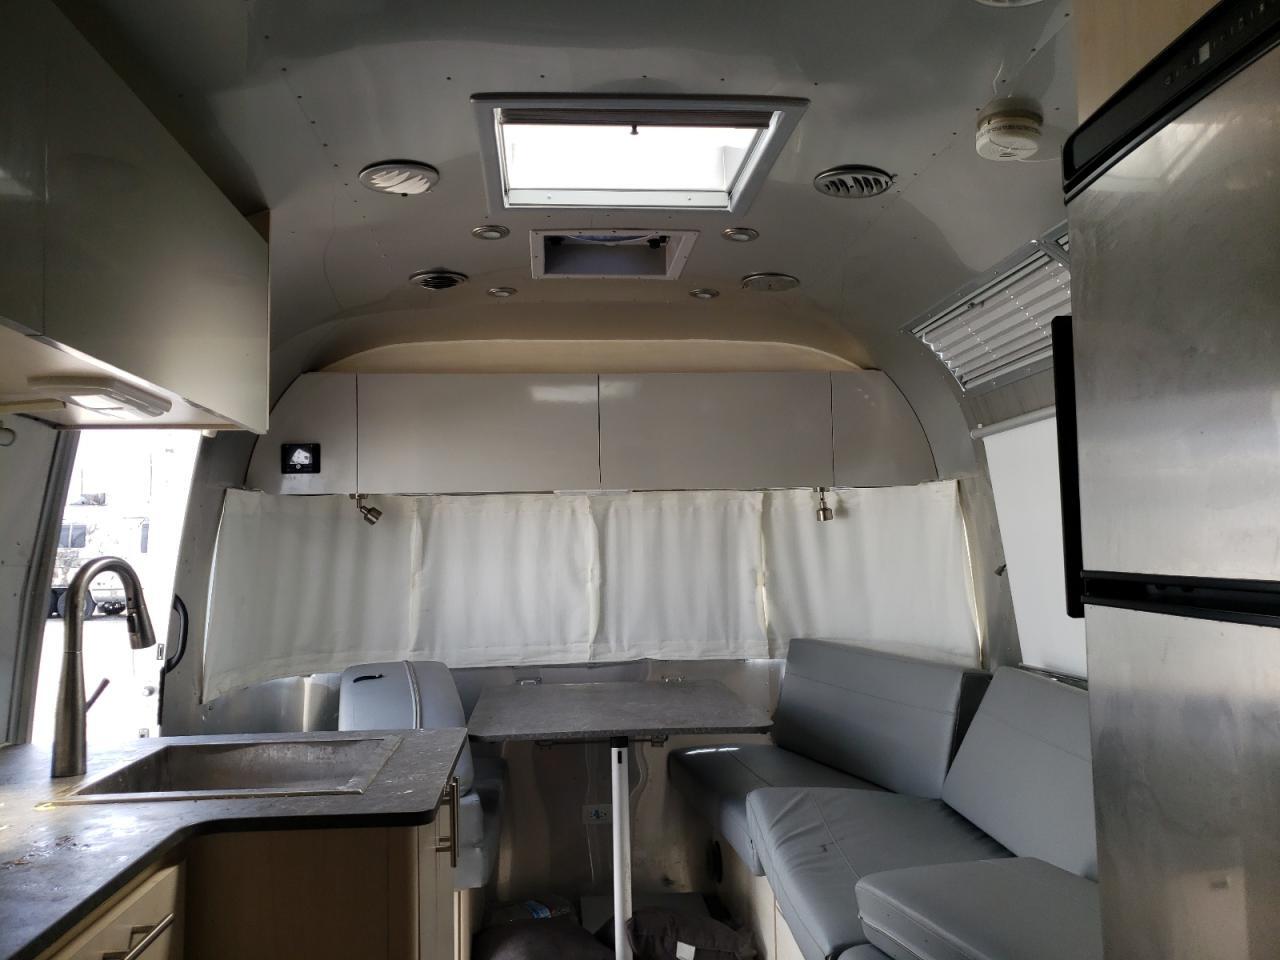 Airstream Trvl Tlr for Sale